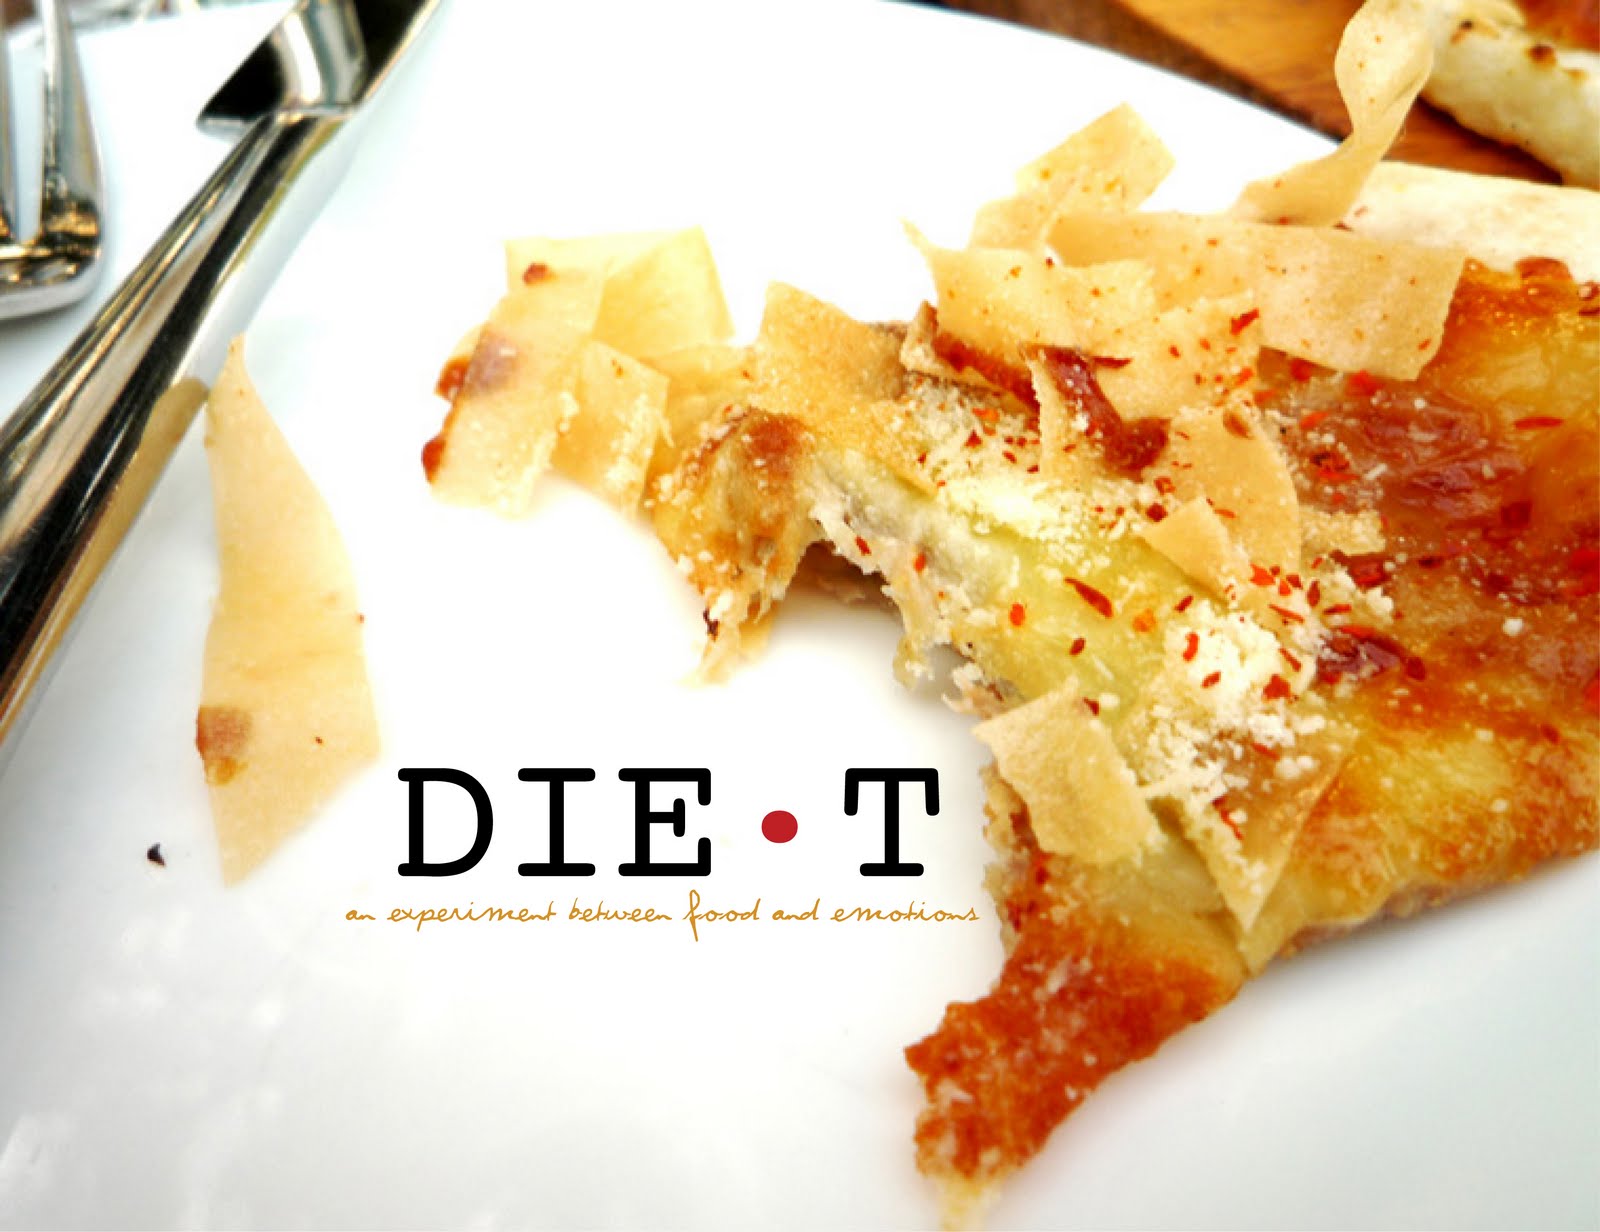 DIE⋅T - An Experiment Between Diets and Emotions